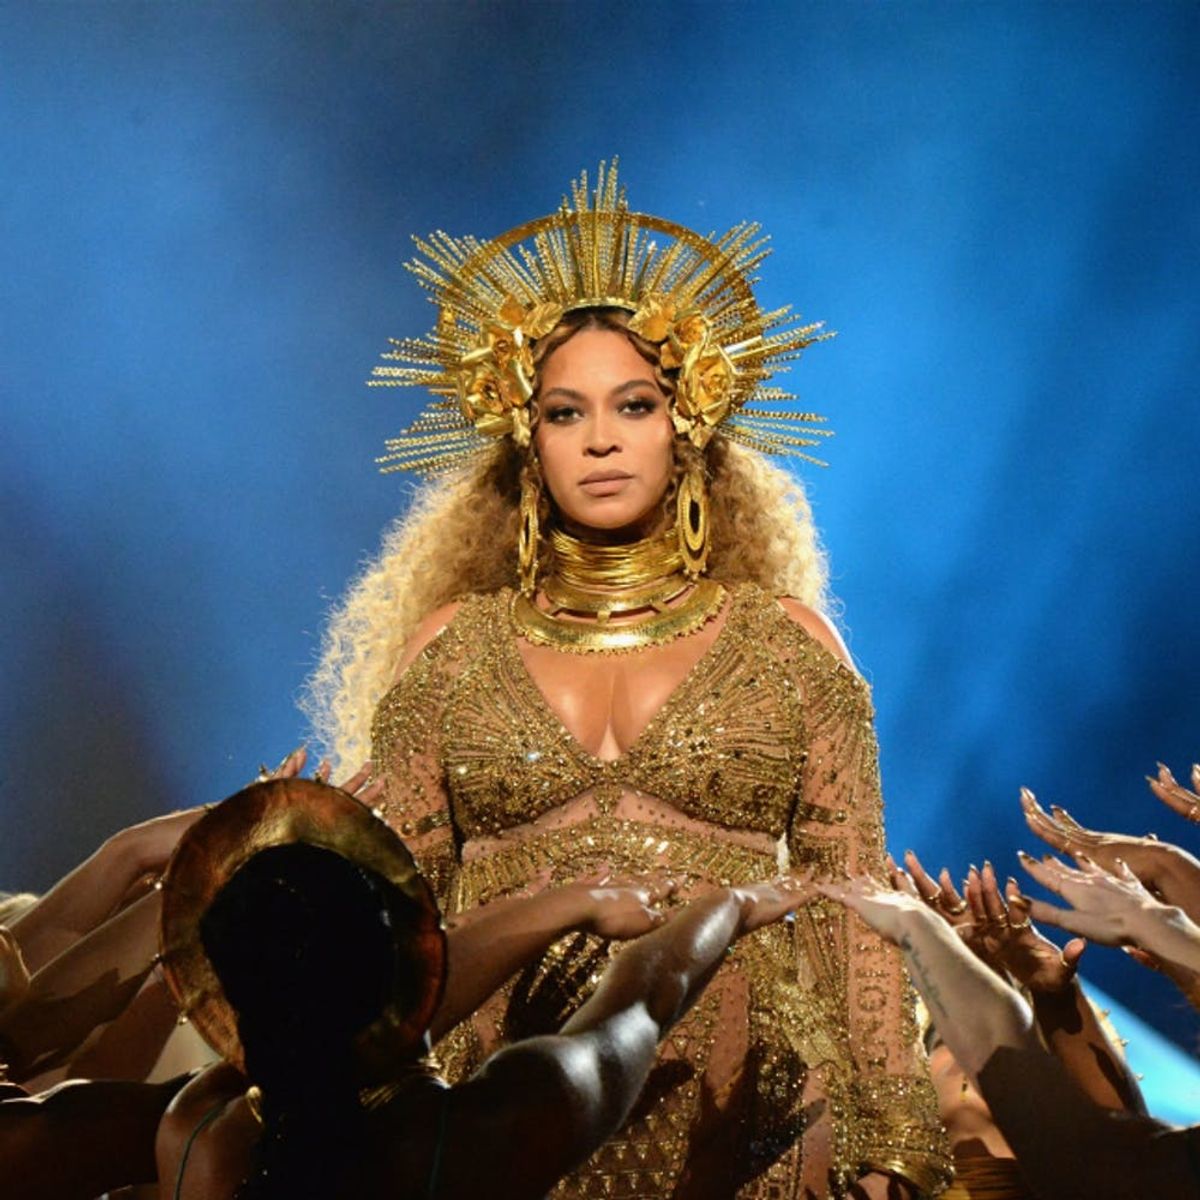 Here’s the Subtle Shout Out You May Have Missed During Beyoncé’s Grammy Performance